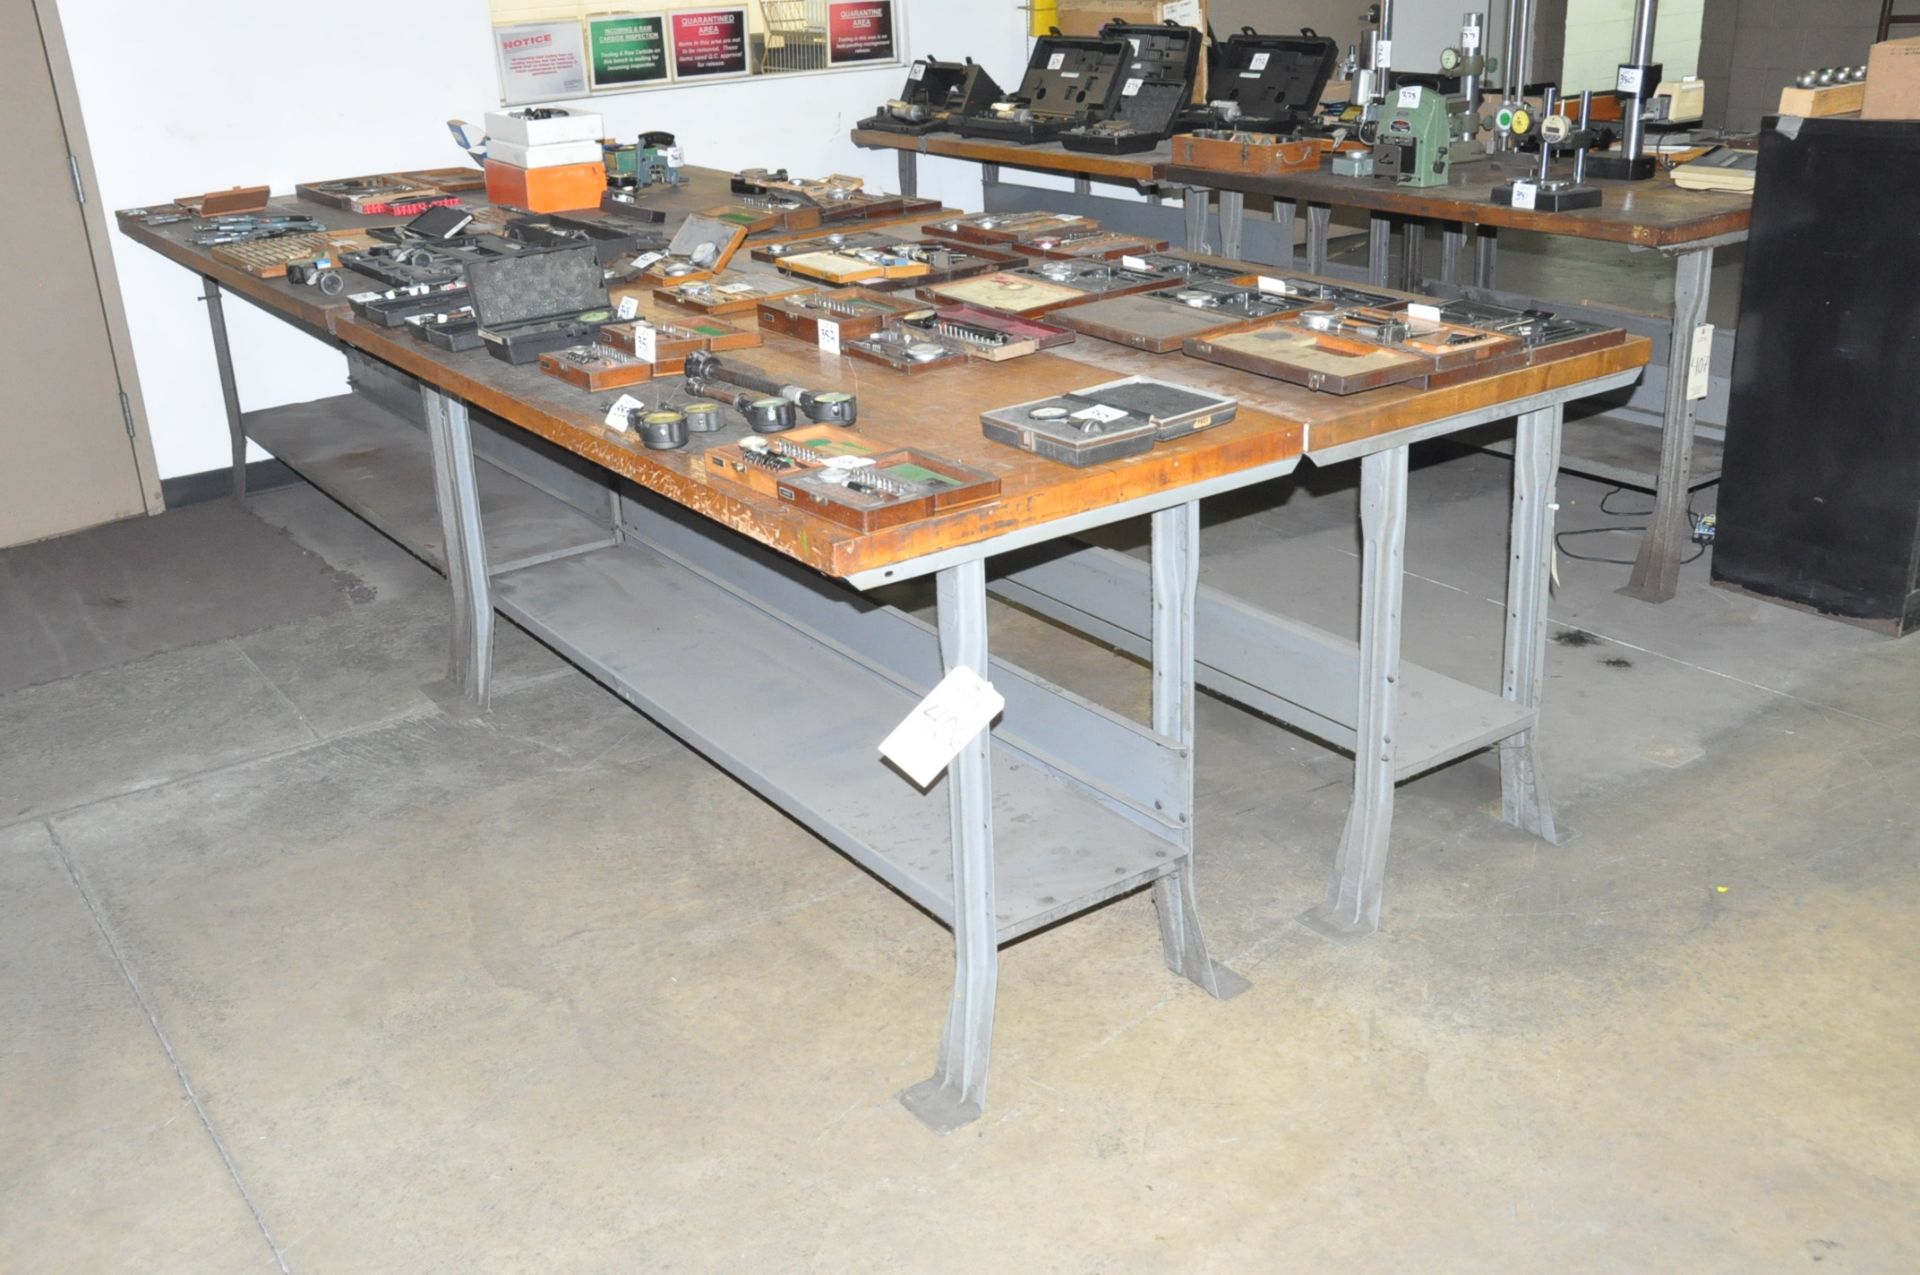 Lot-(4) Work Benches in (1) Group, (Contents Not Included), (Not to Be Removed Until Empty)